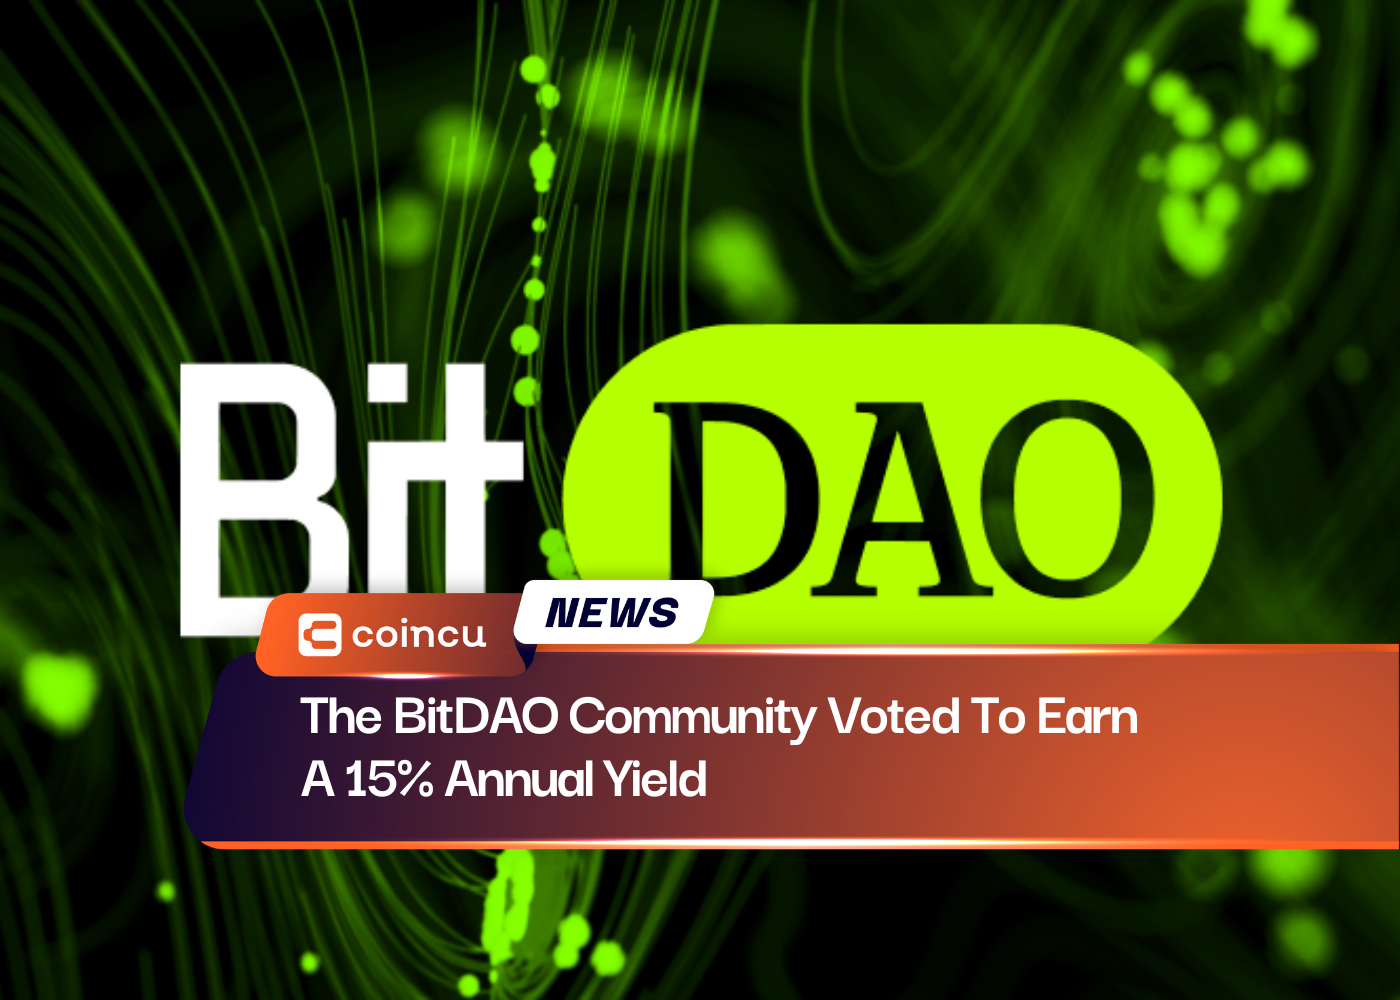 The BitDAO Community Voted To Earn A 15% Annual Yield